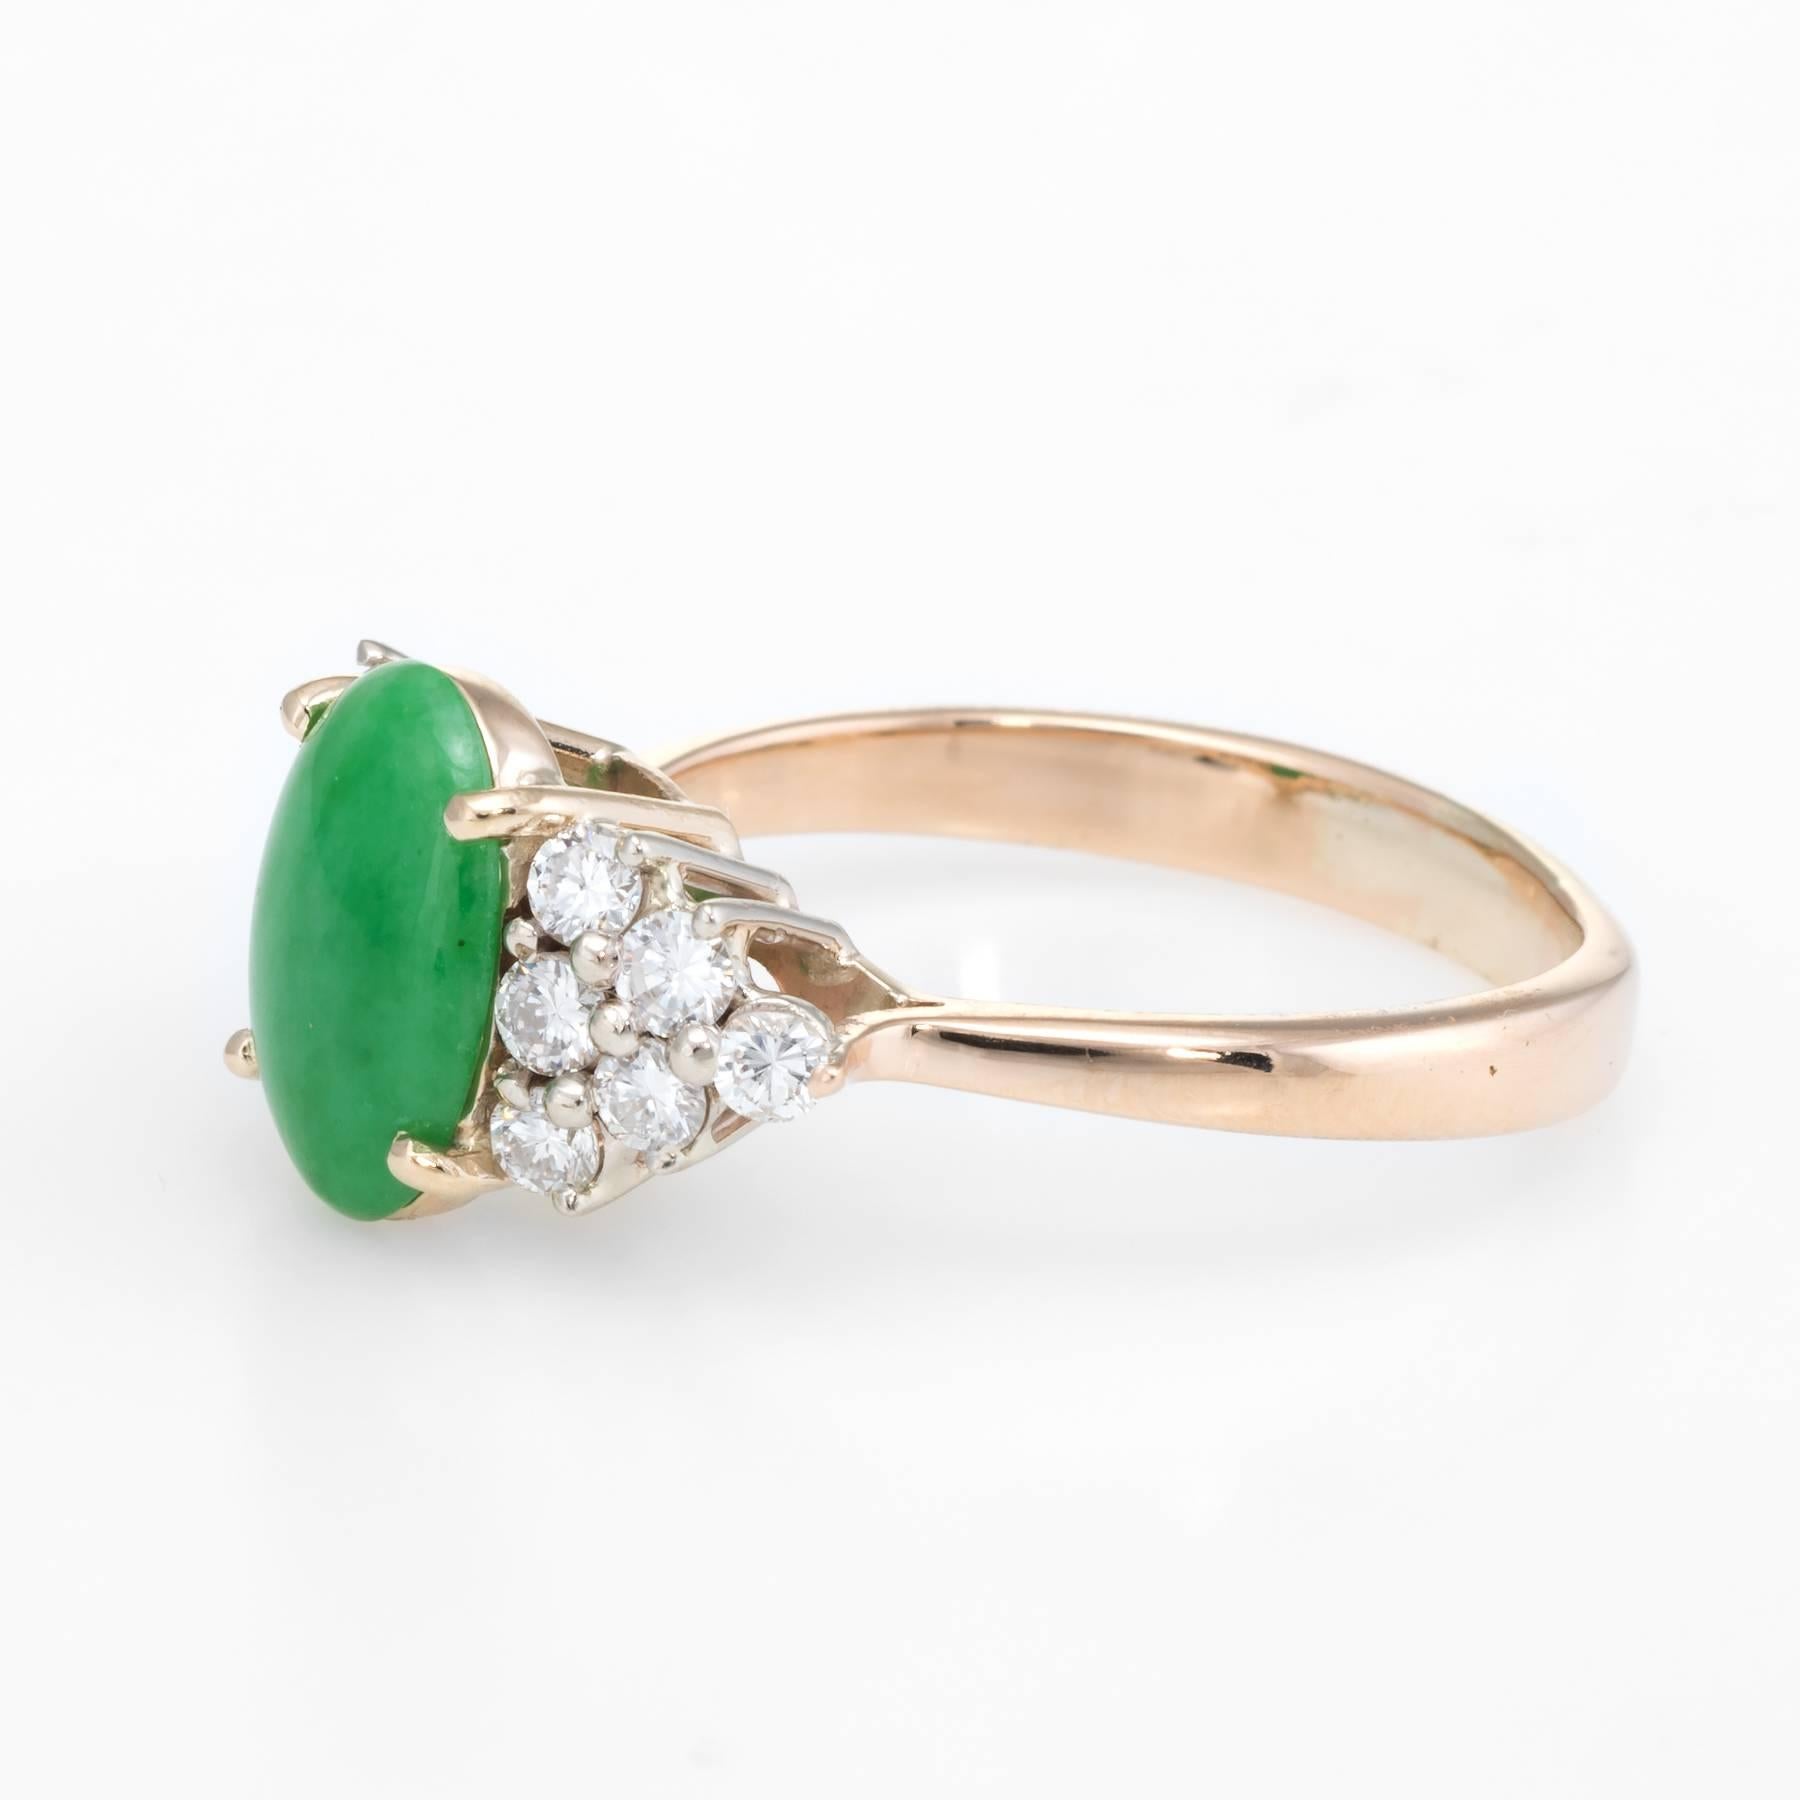 Elegant vintage cocktail ring, crafted in 14 karat yellow gold. 

Centrally mounted cabochon cut jade measures 11mm x 8mm (estimated at 4 carats), accented with 12 x 0.04 carat round brilliant cut diamonds. The total diamond weight is estimated at